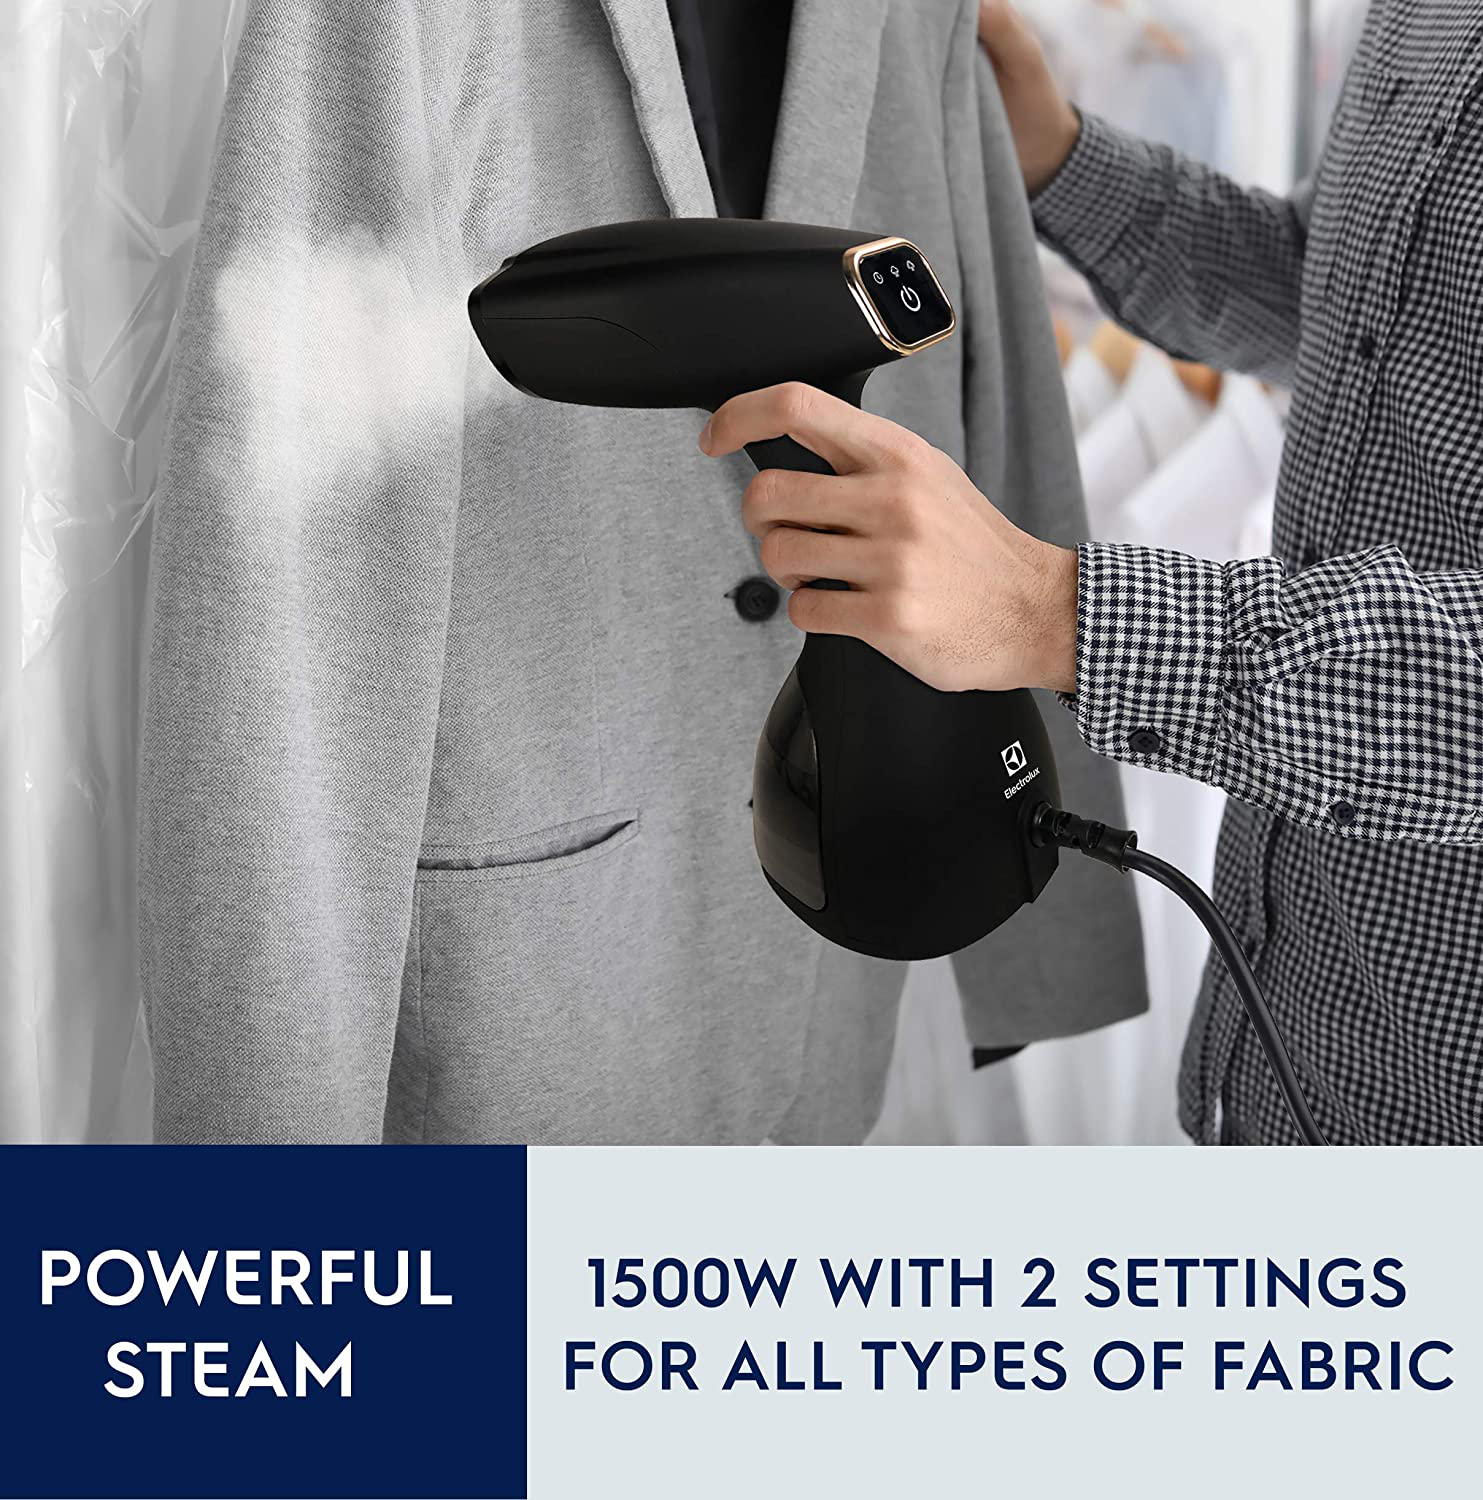 Electrolux Portable Handheld Garment & Fabric Steamer, 1500 Watt, Quick Heat Ceramic Plate Steam Nozzle, 2-in-1 Fabric Wrinkle Remover and Clothes Iron, with Cloth Brush and Lint Brush